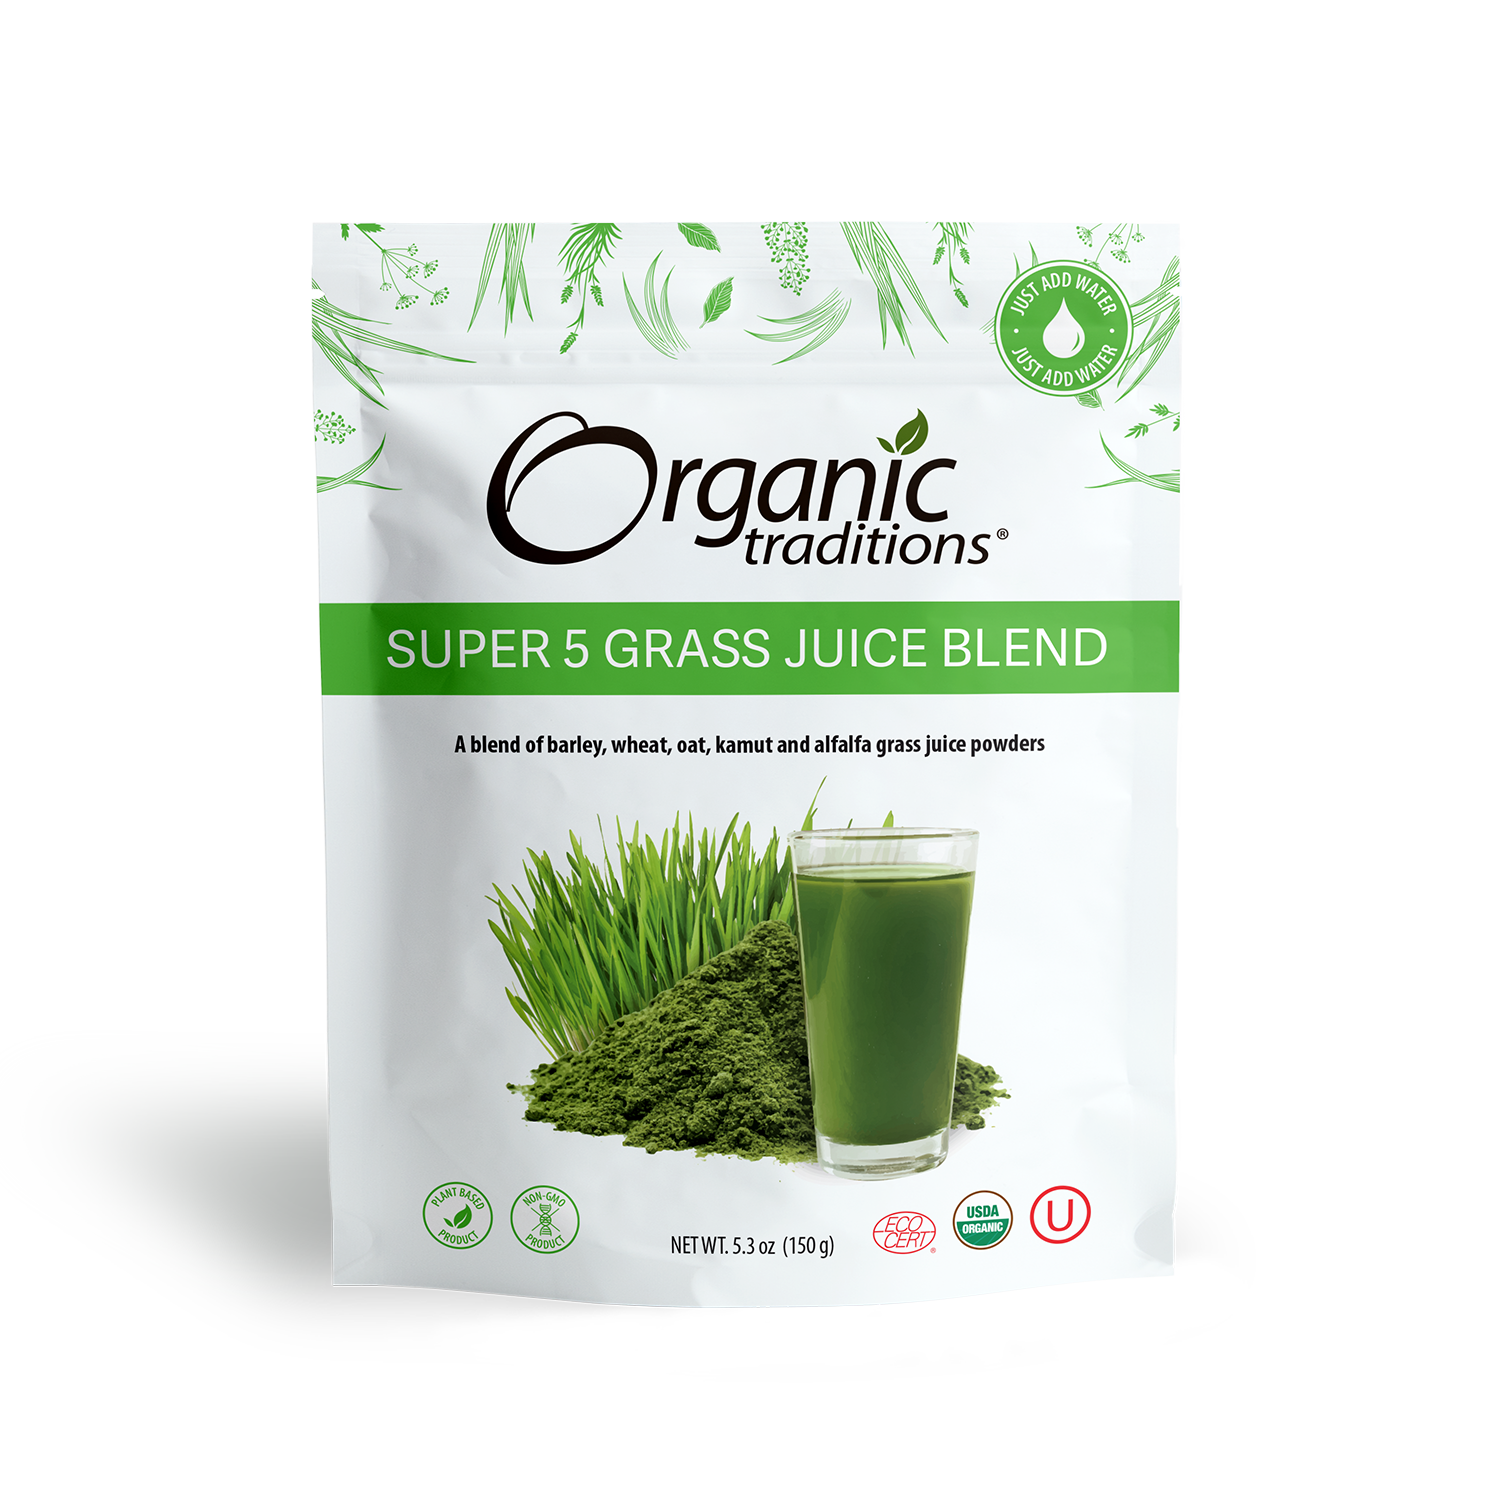 organic traditions super 5 grass juice blend front of bag image